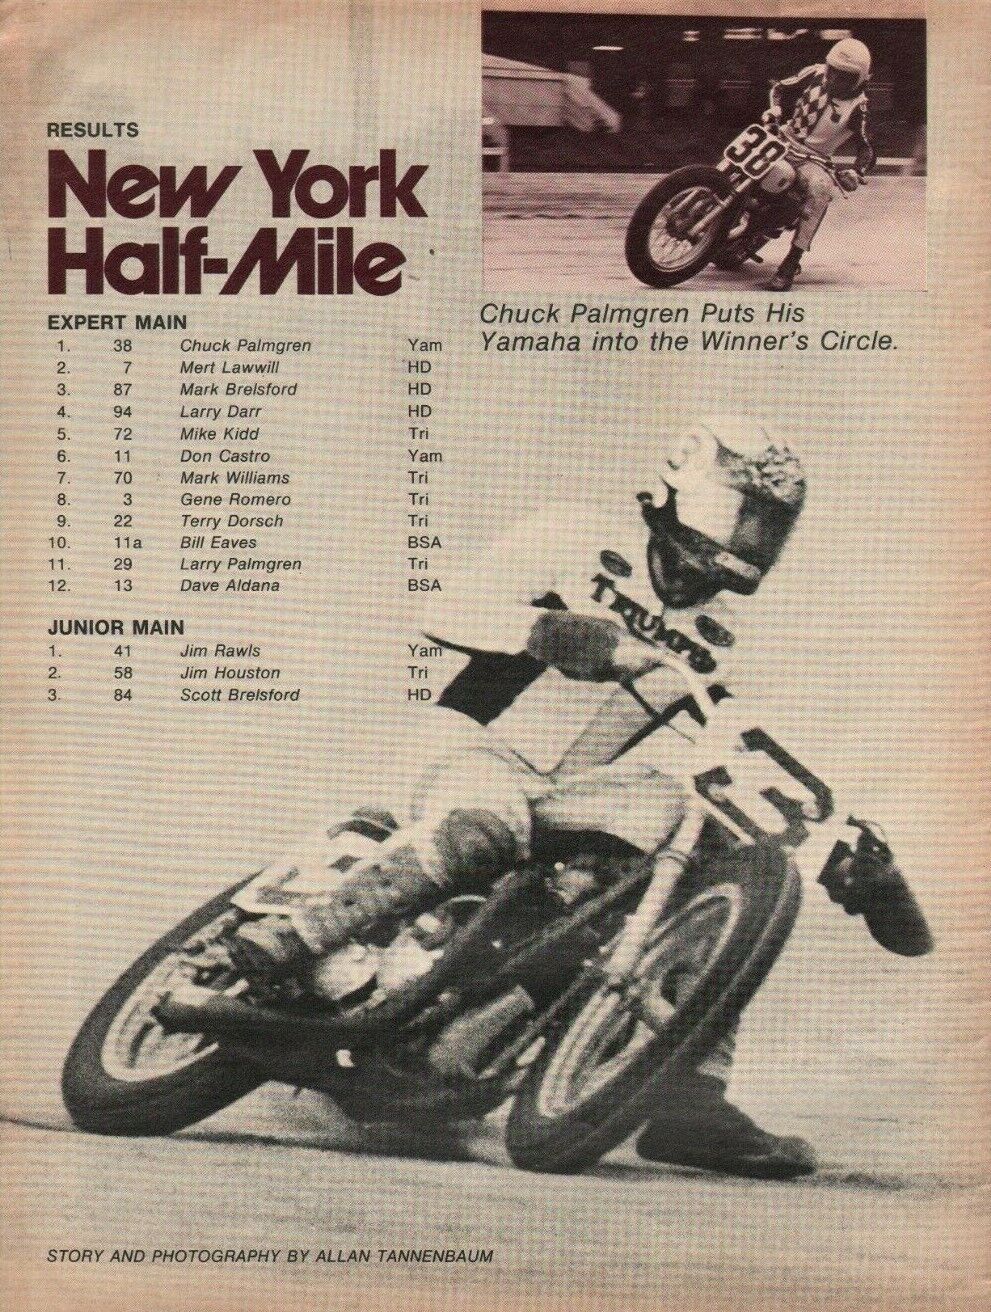 1972 New York Half-Mile / Chuck Palmgren - 3-Page Vintage Motorcycle Article